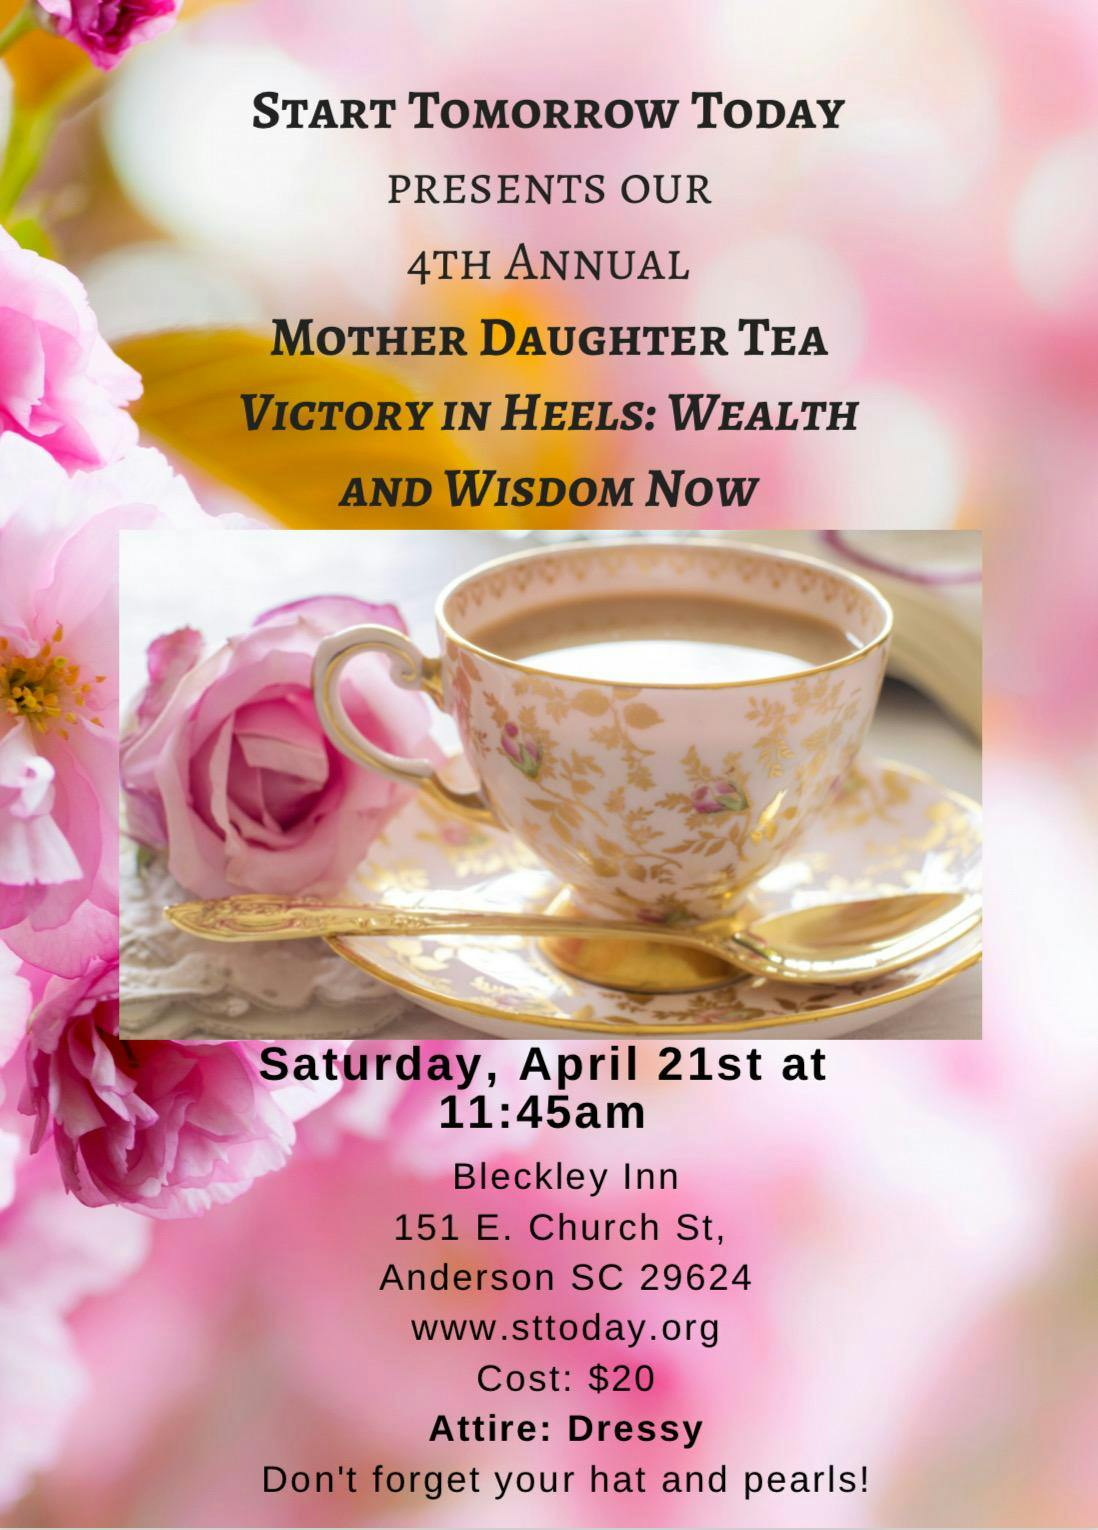 Start Tomorrow Today's 4th Annual Mother Daughter Tea